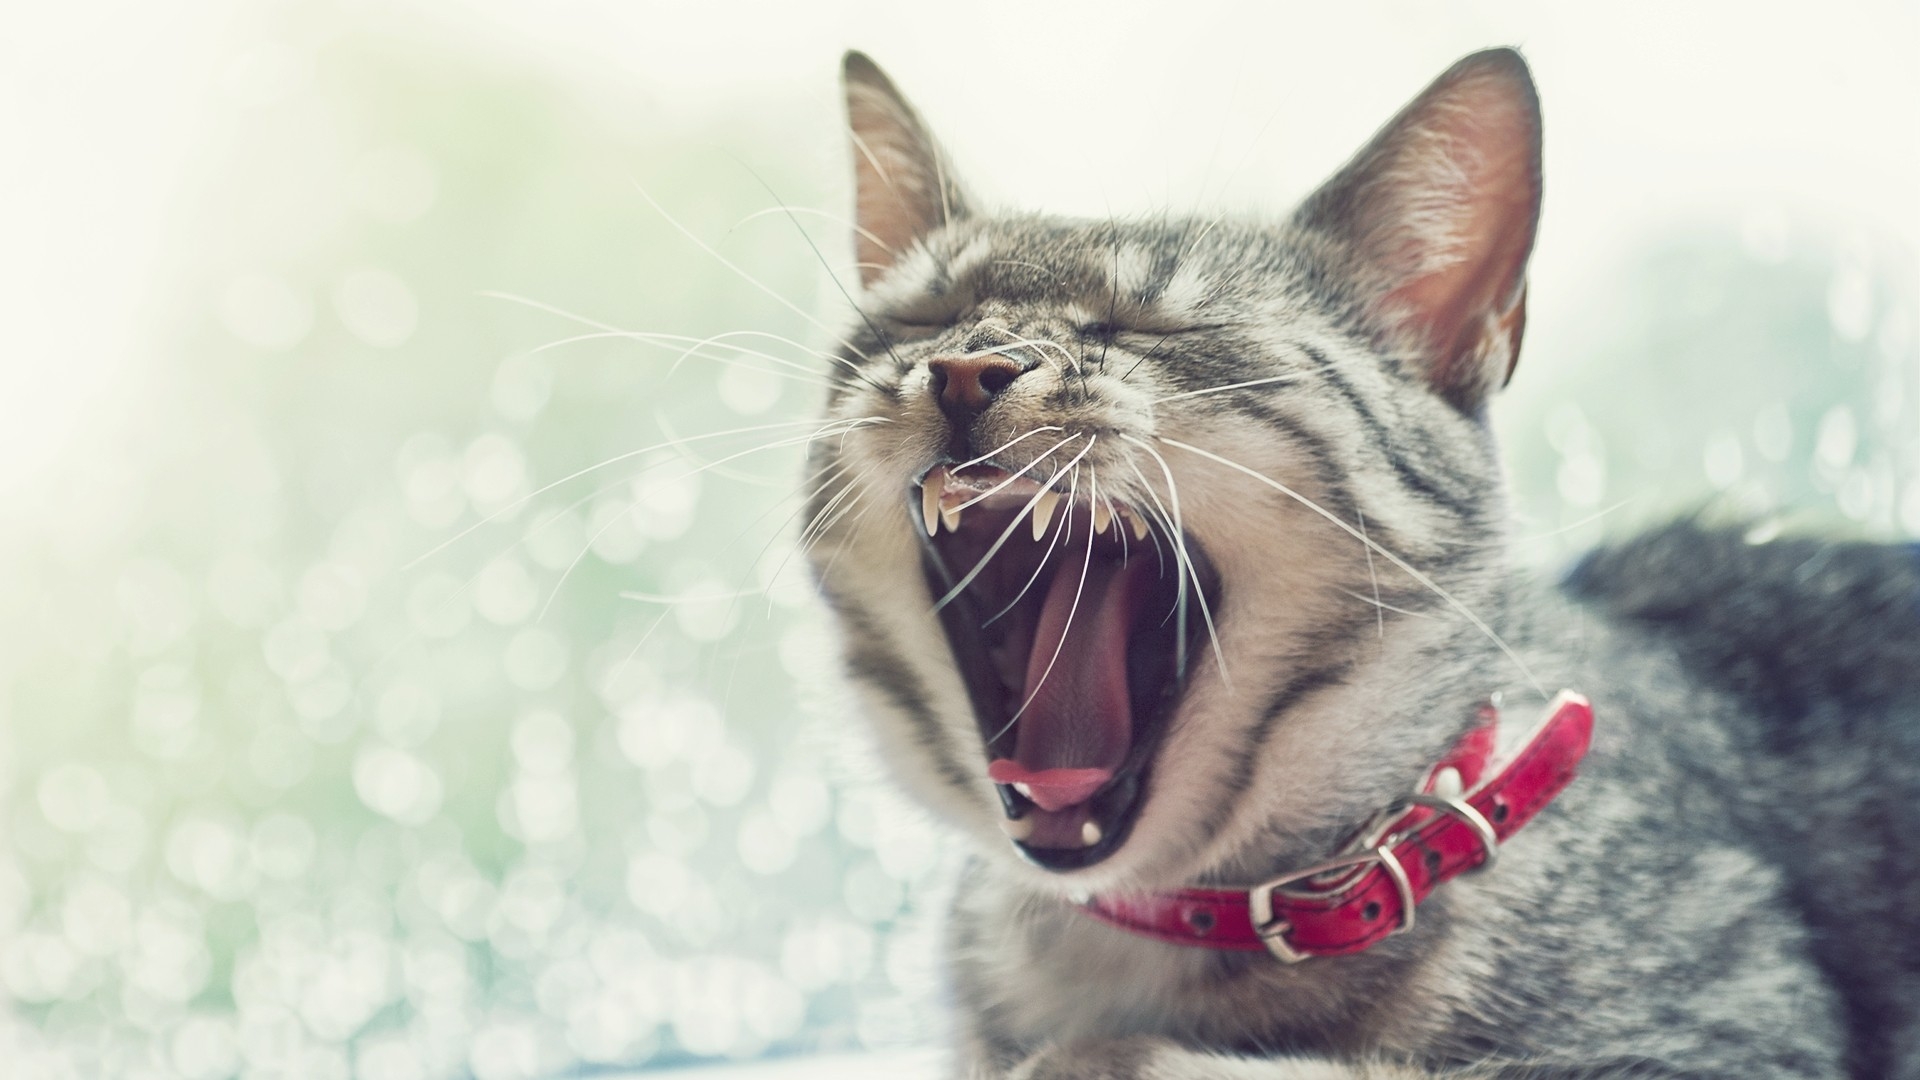 Wallpapers cat face yawn on the desktop